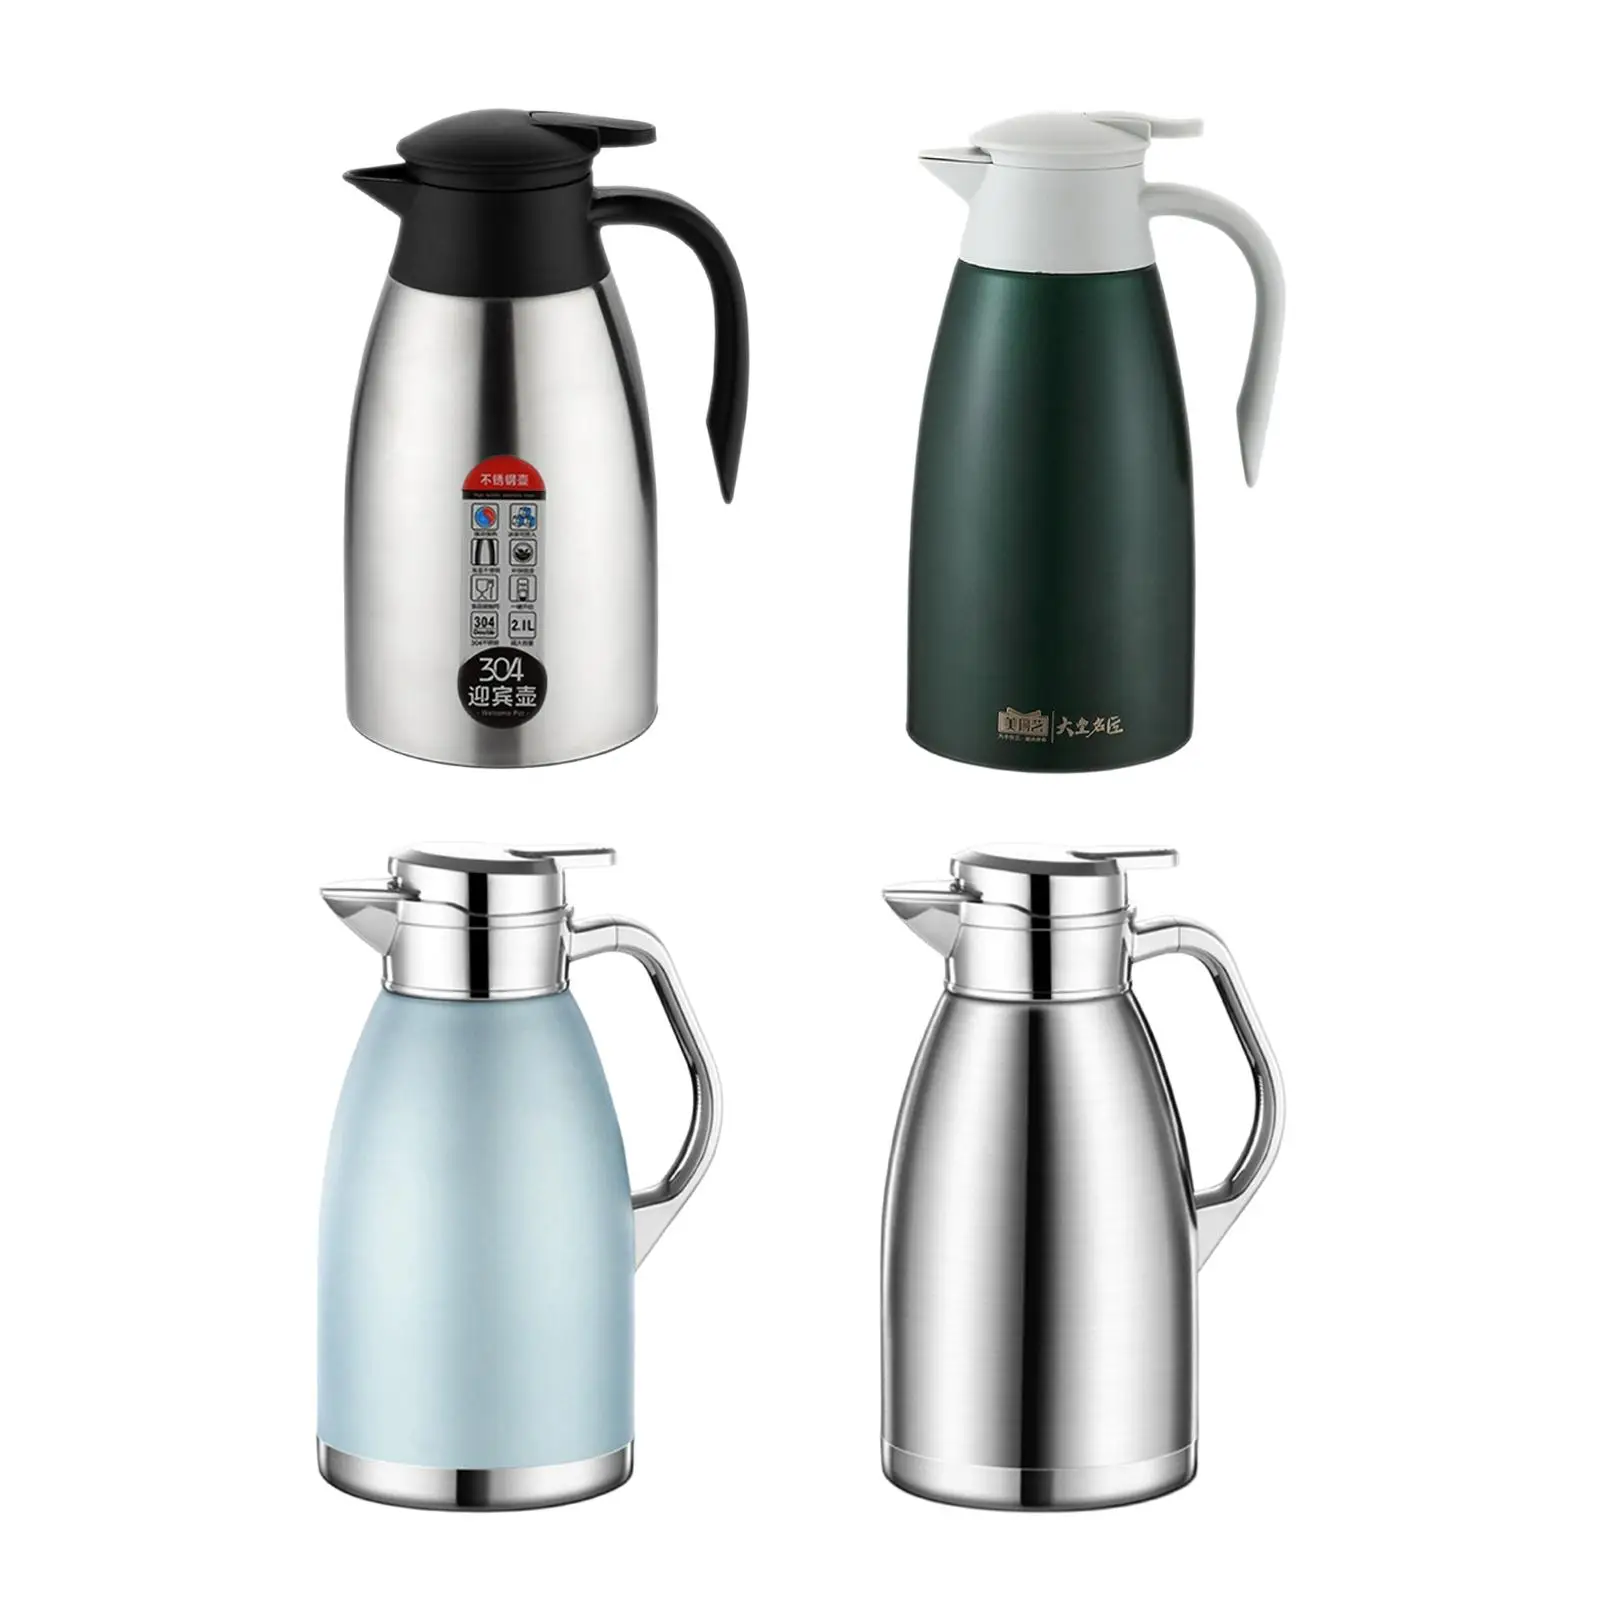 Thermal Insulated Carafes Kettle Large Capacity Thermal Beverage Dispenser Coffee Tea Pot for Cafe Office Kitchen Water